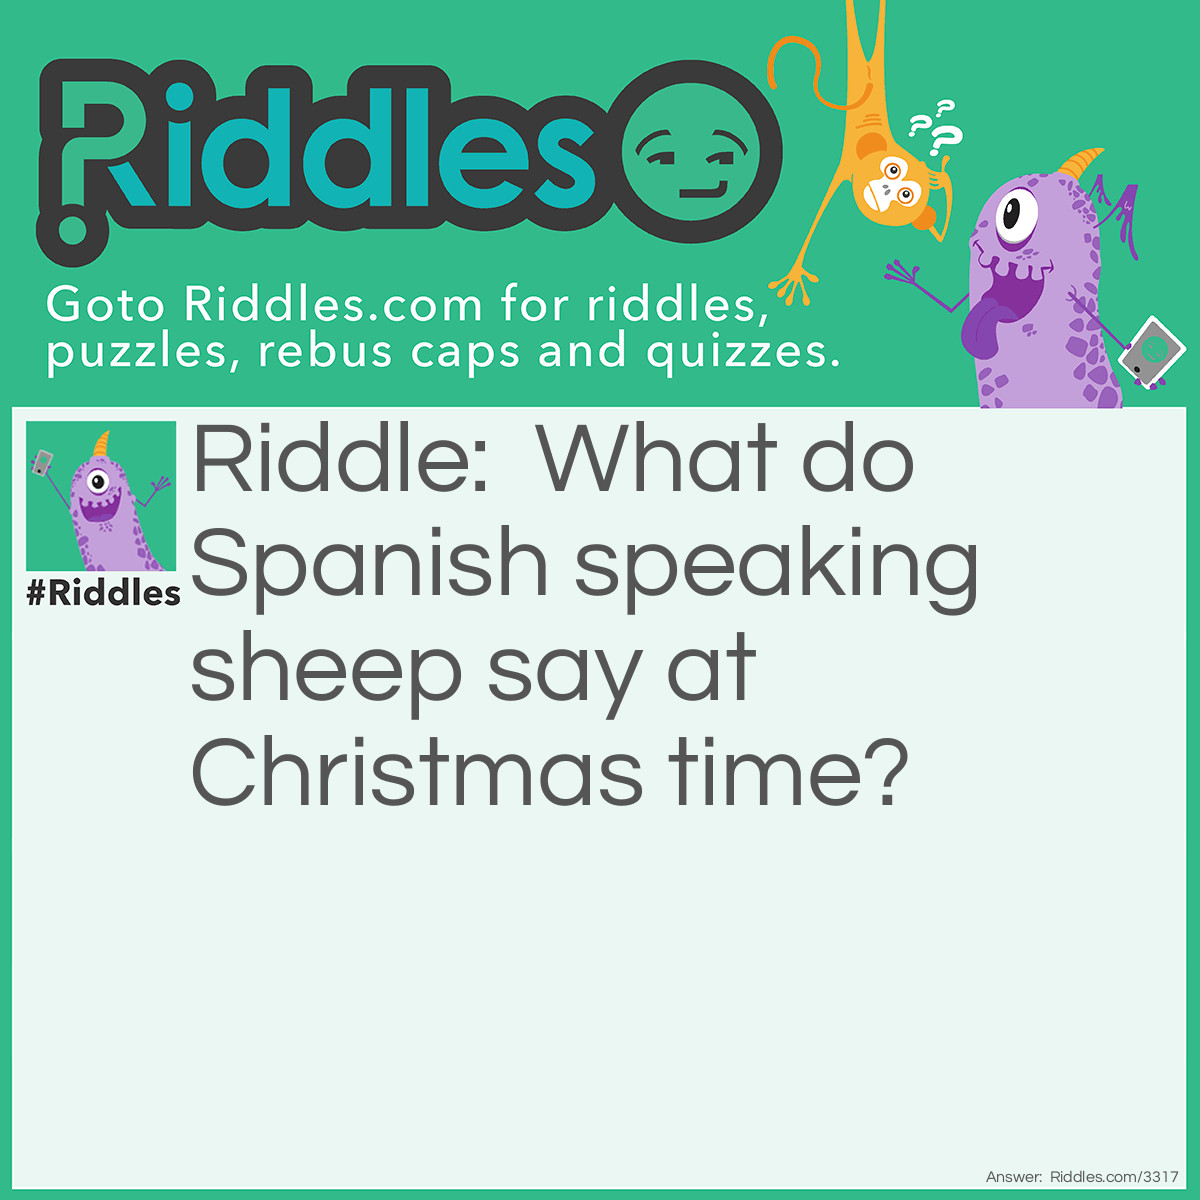 Riddle: What do Spanish speaking sheep say at Christmas time? Answer: Fleece Navidad.